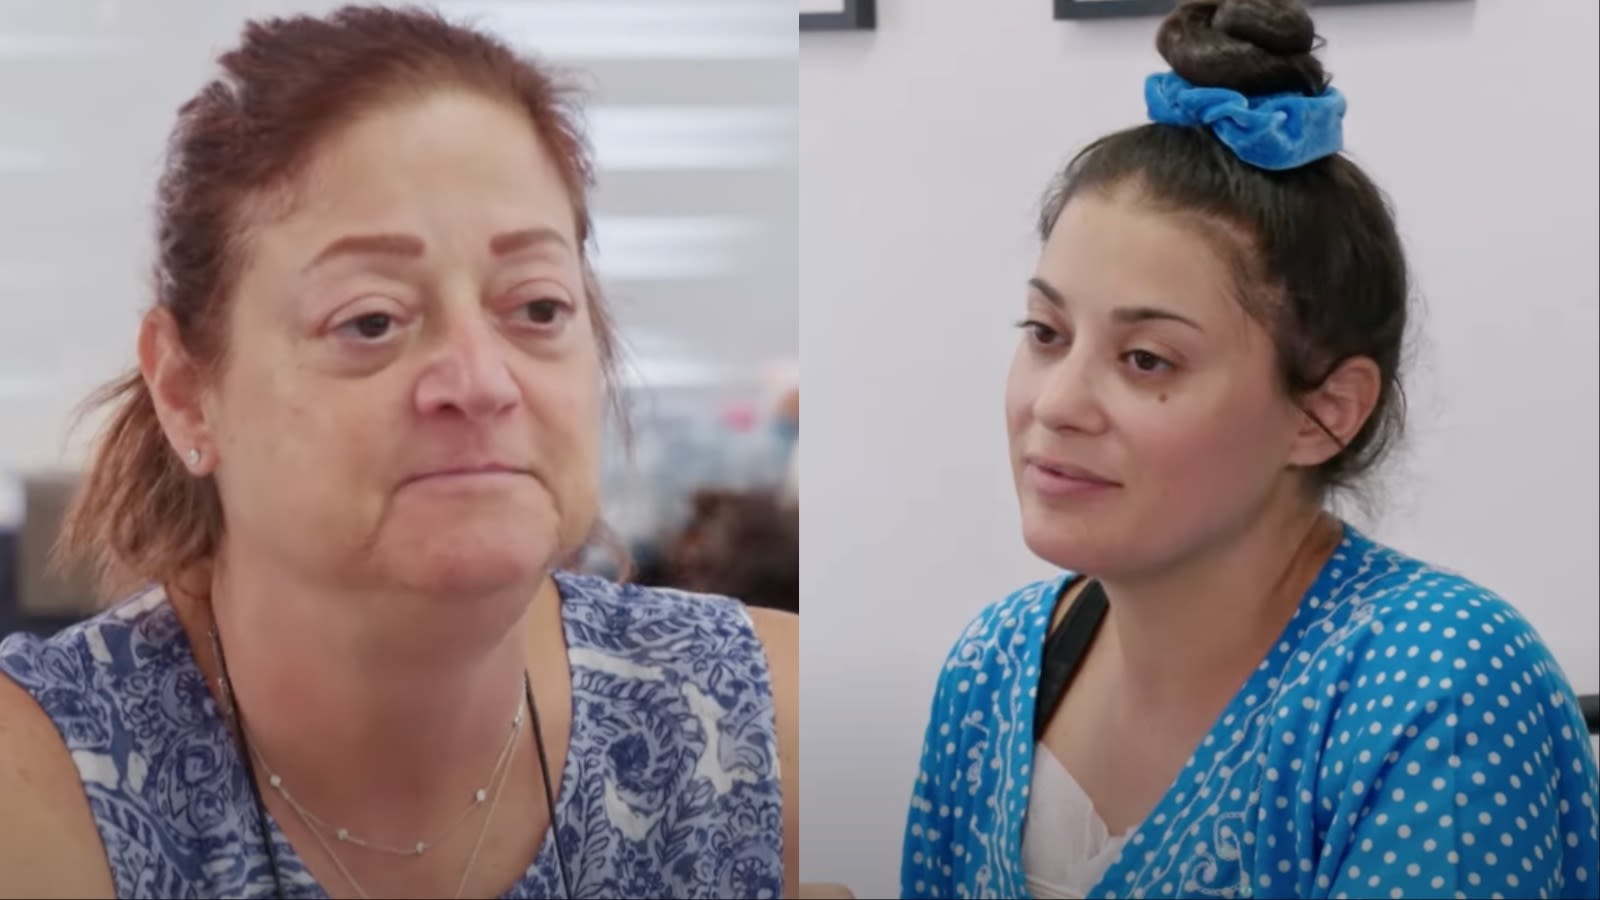 90 Day Fiancé fans applaud Loren’s mom for slamming complaints about surgery recovery - Dexerto